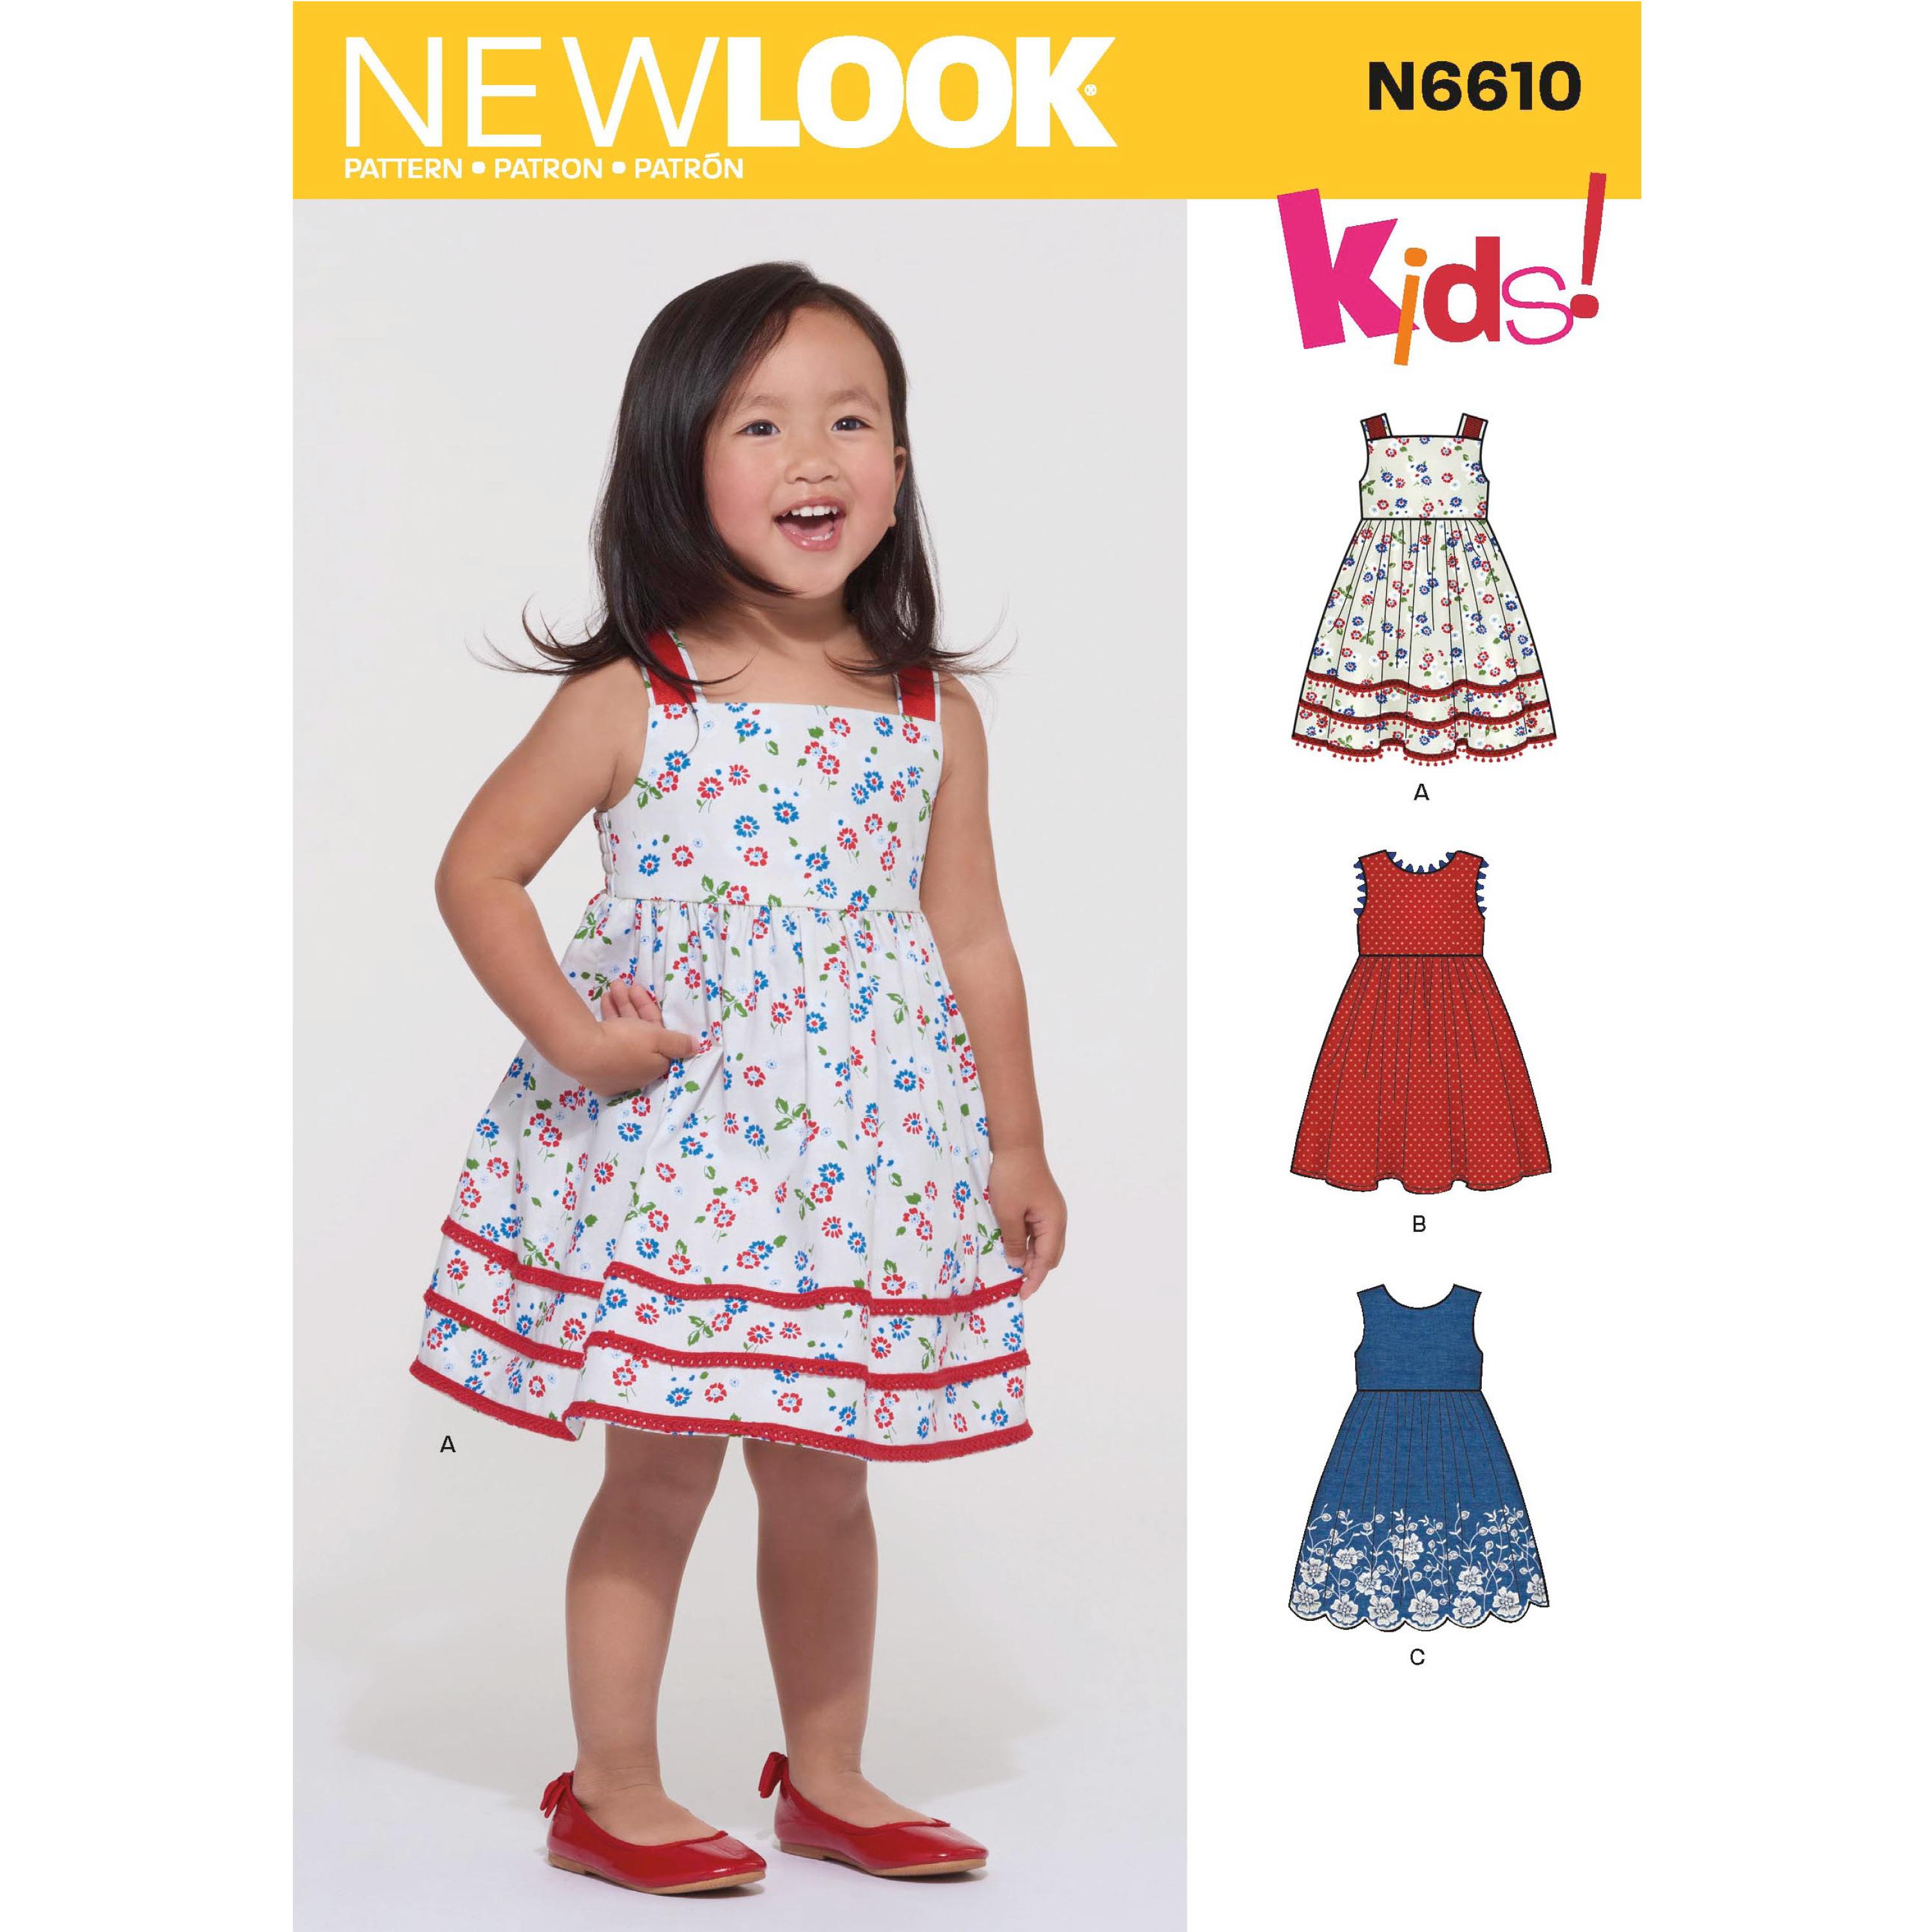 NewLook Sewing Pattern N6610 Toddlers' Dress